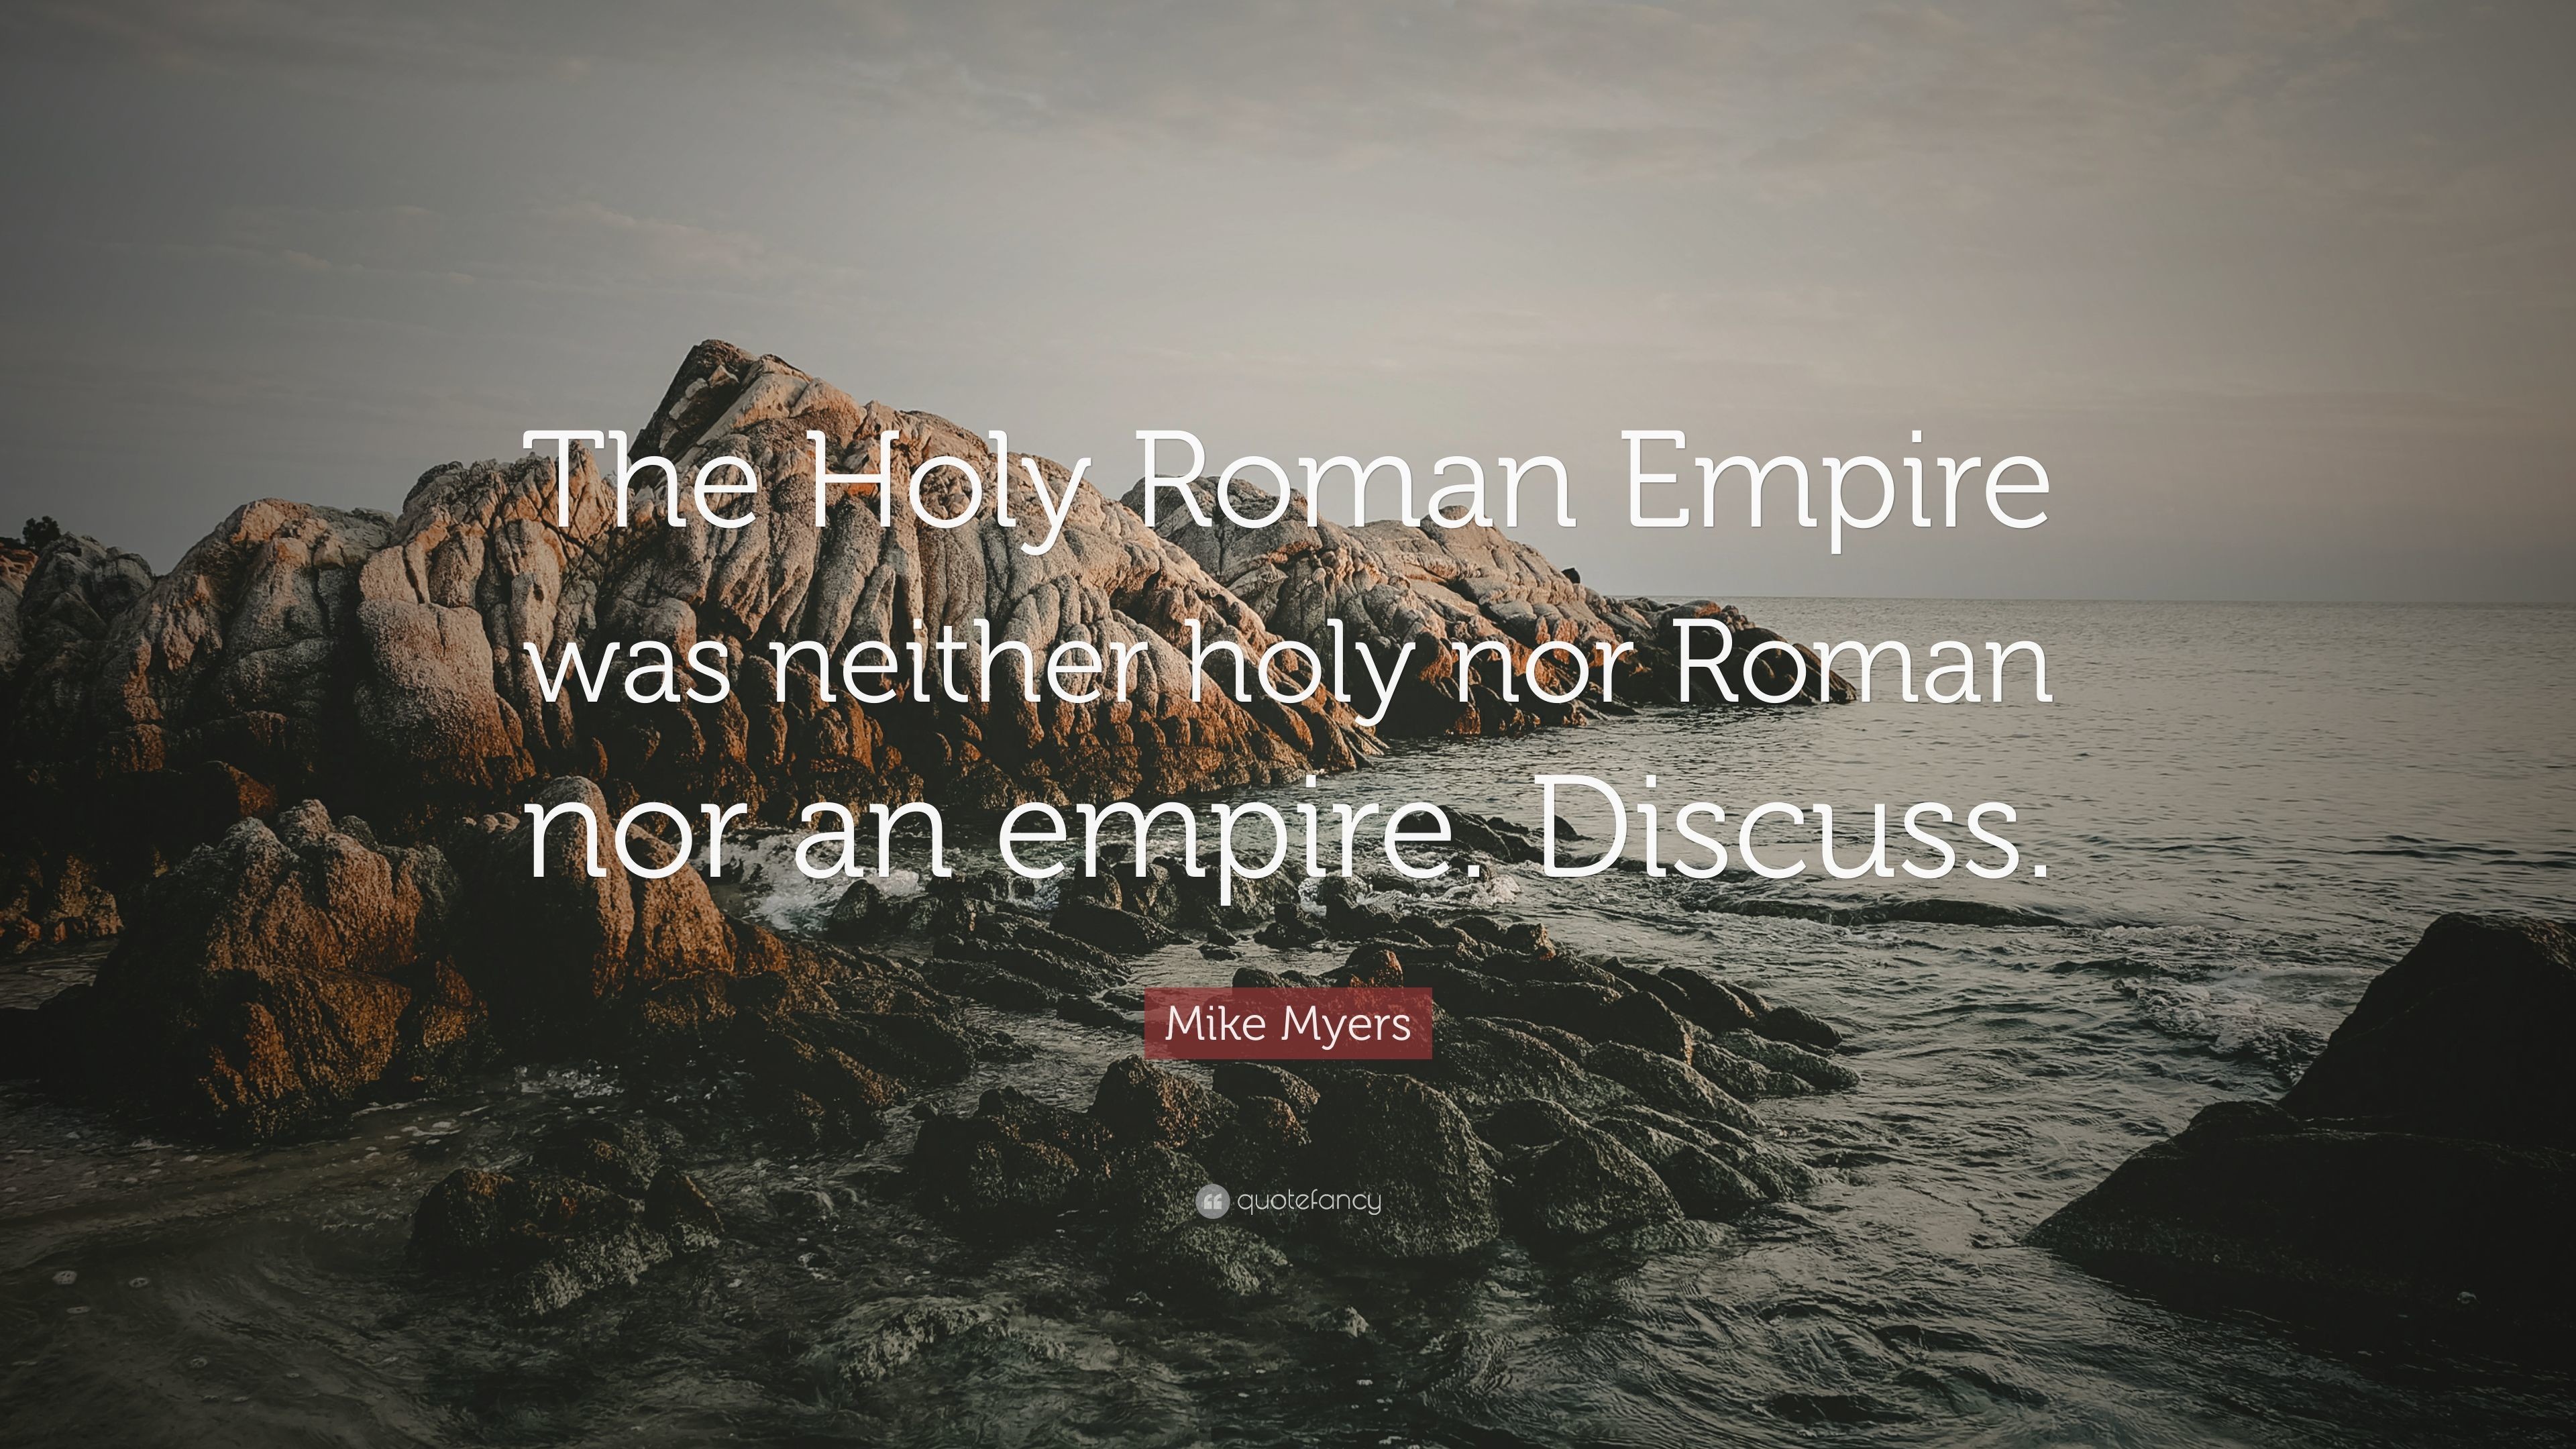 3840x2160 Mike Myers Quote: “The Holy Roman Empire was neither holy nor Roman nor an